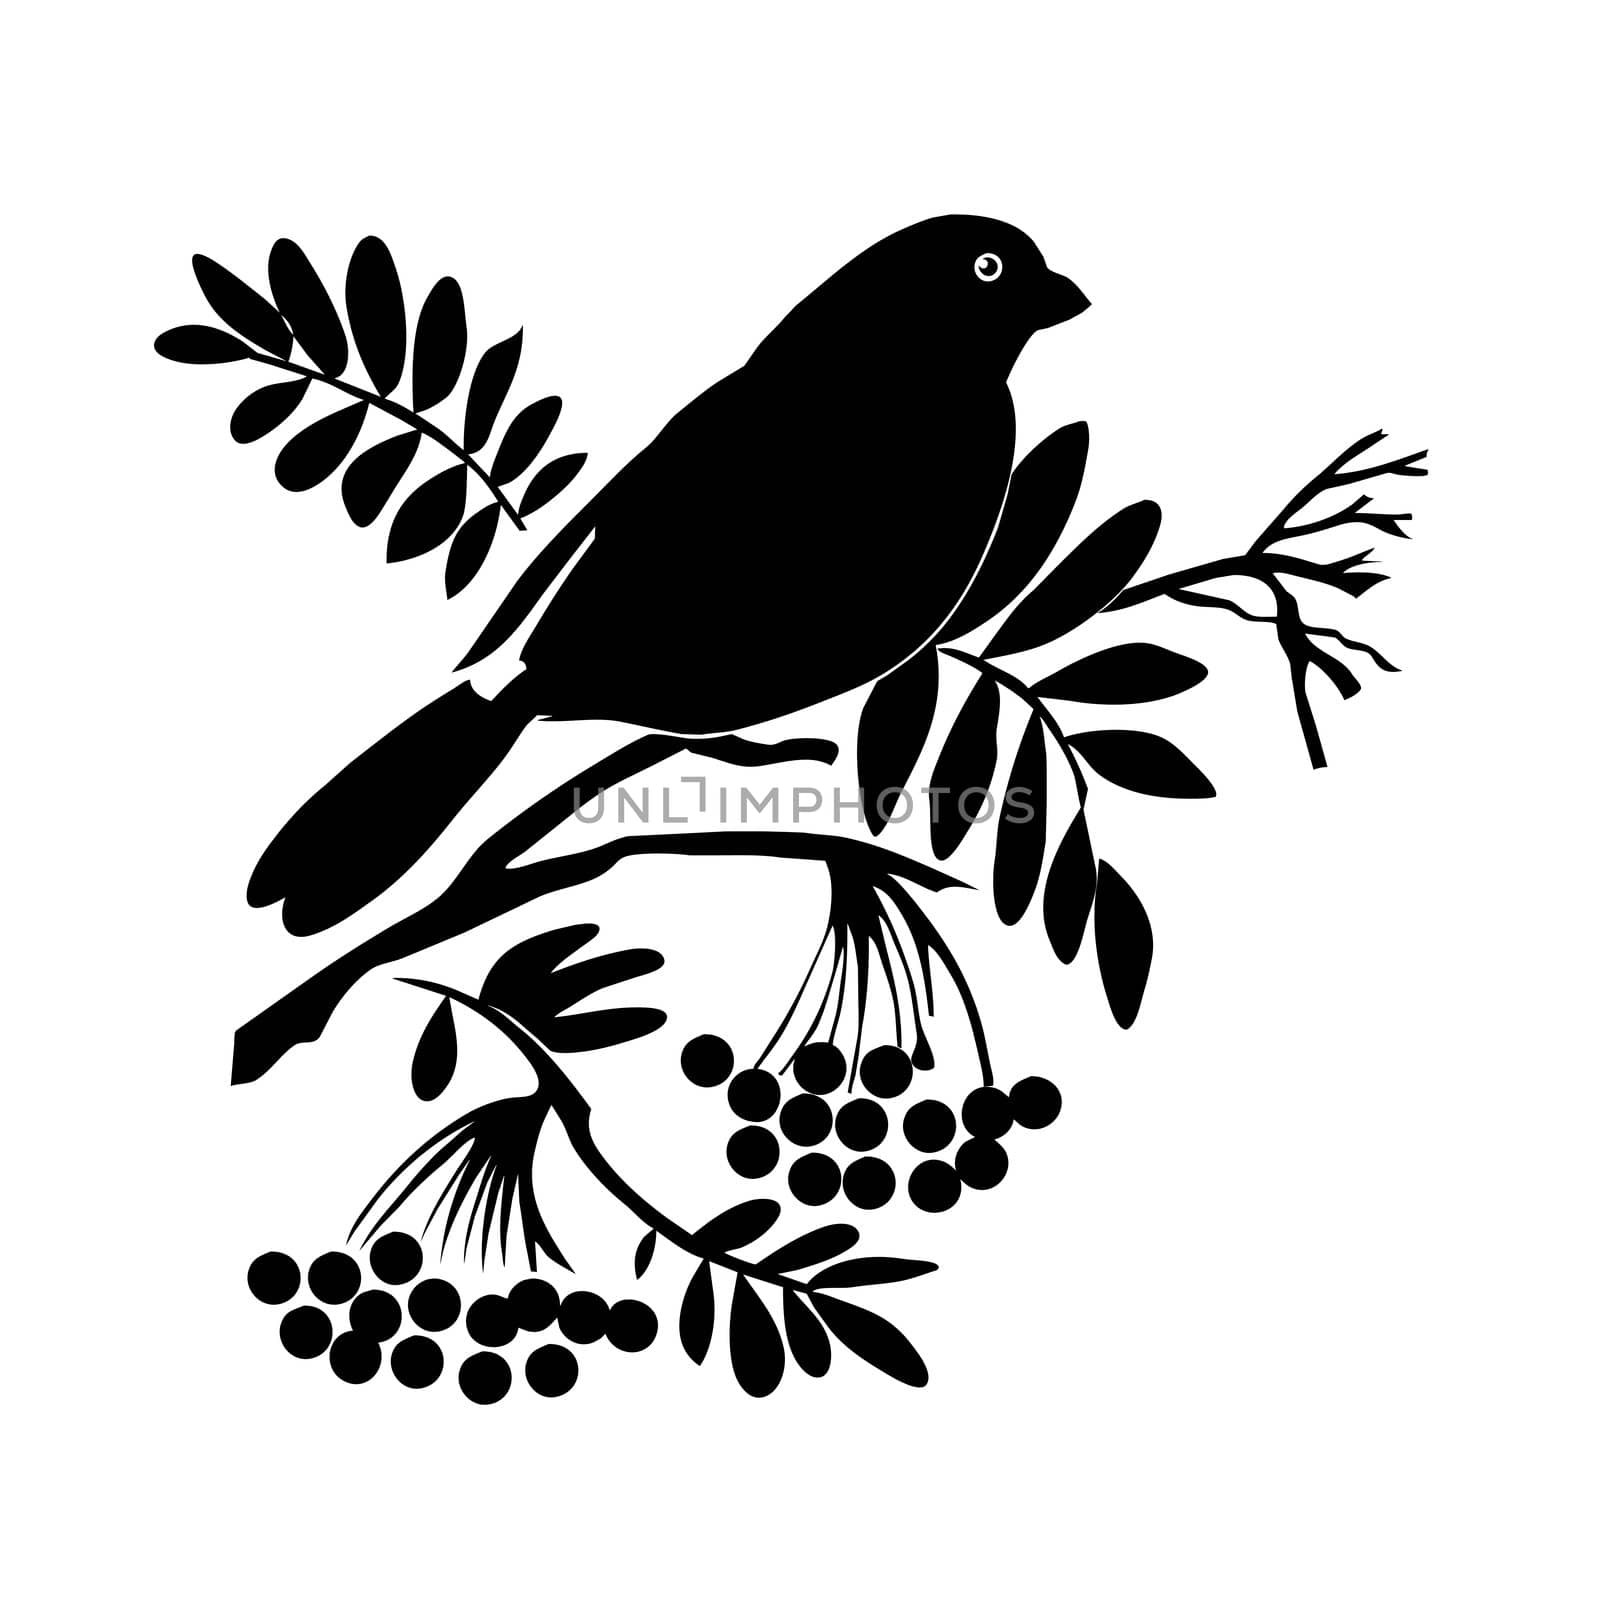 bird silhouette on white background, vector illustration by basel101658